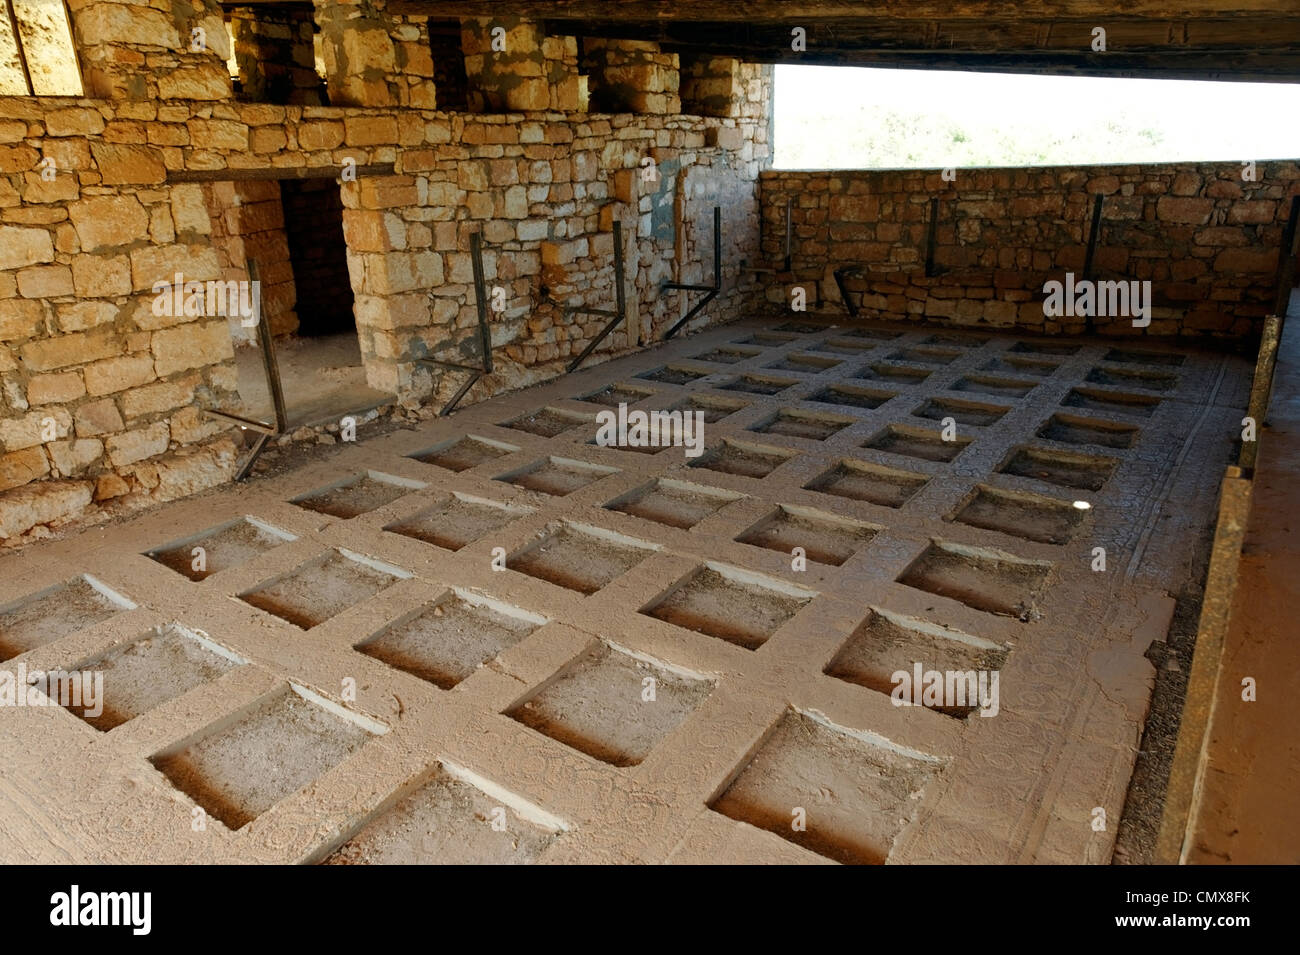 View of the now empty squares of the Eastern Church floor where the fifty mosaics were found, before being moved to the museum. Stock Photo